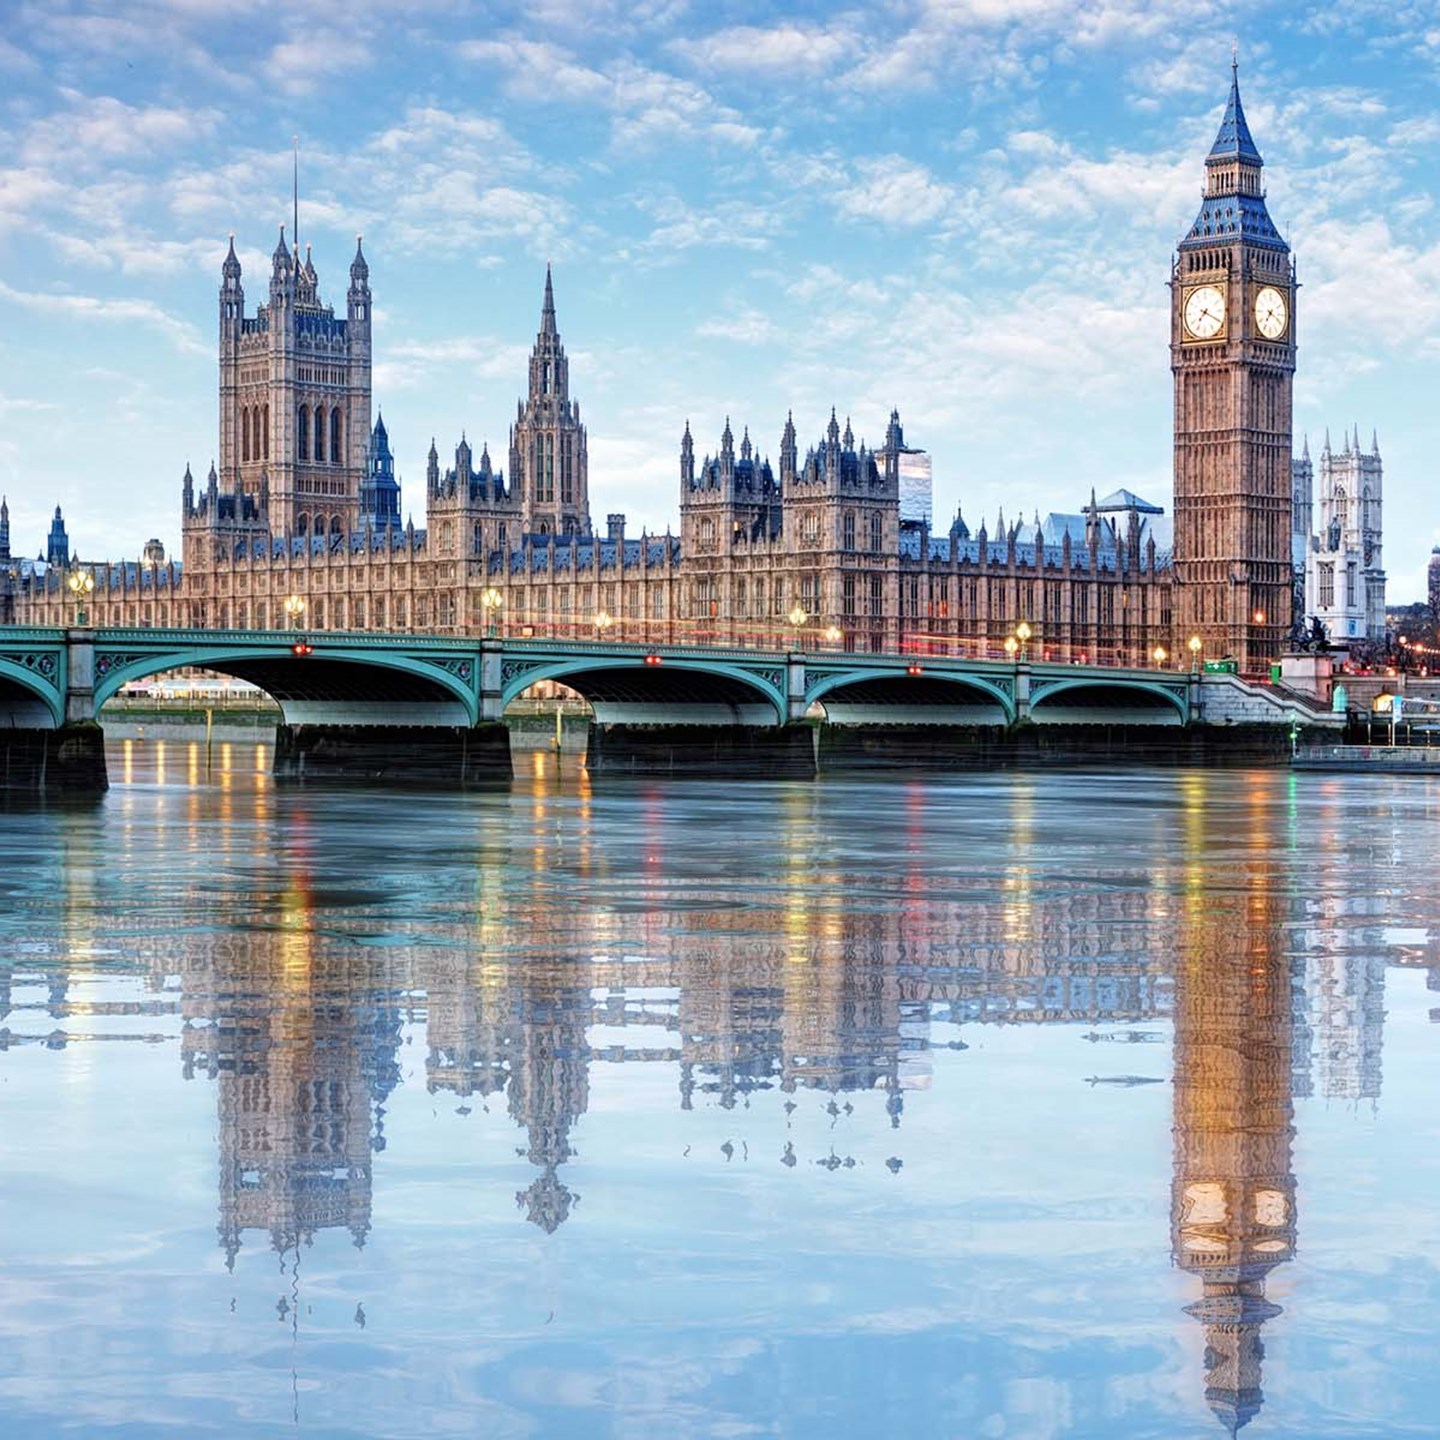 An photo of London landmarks Big Ben and the River Thames